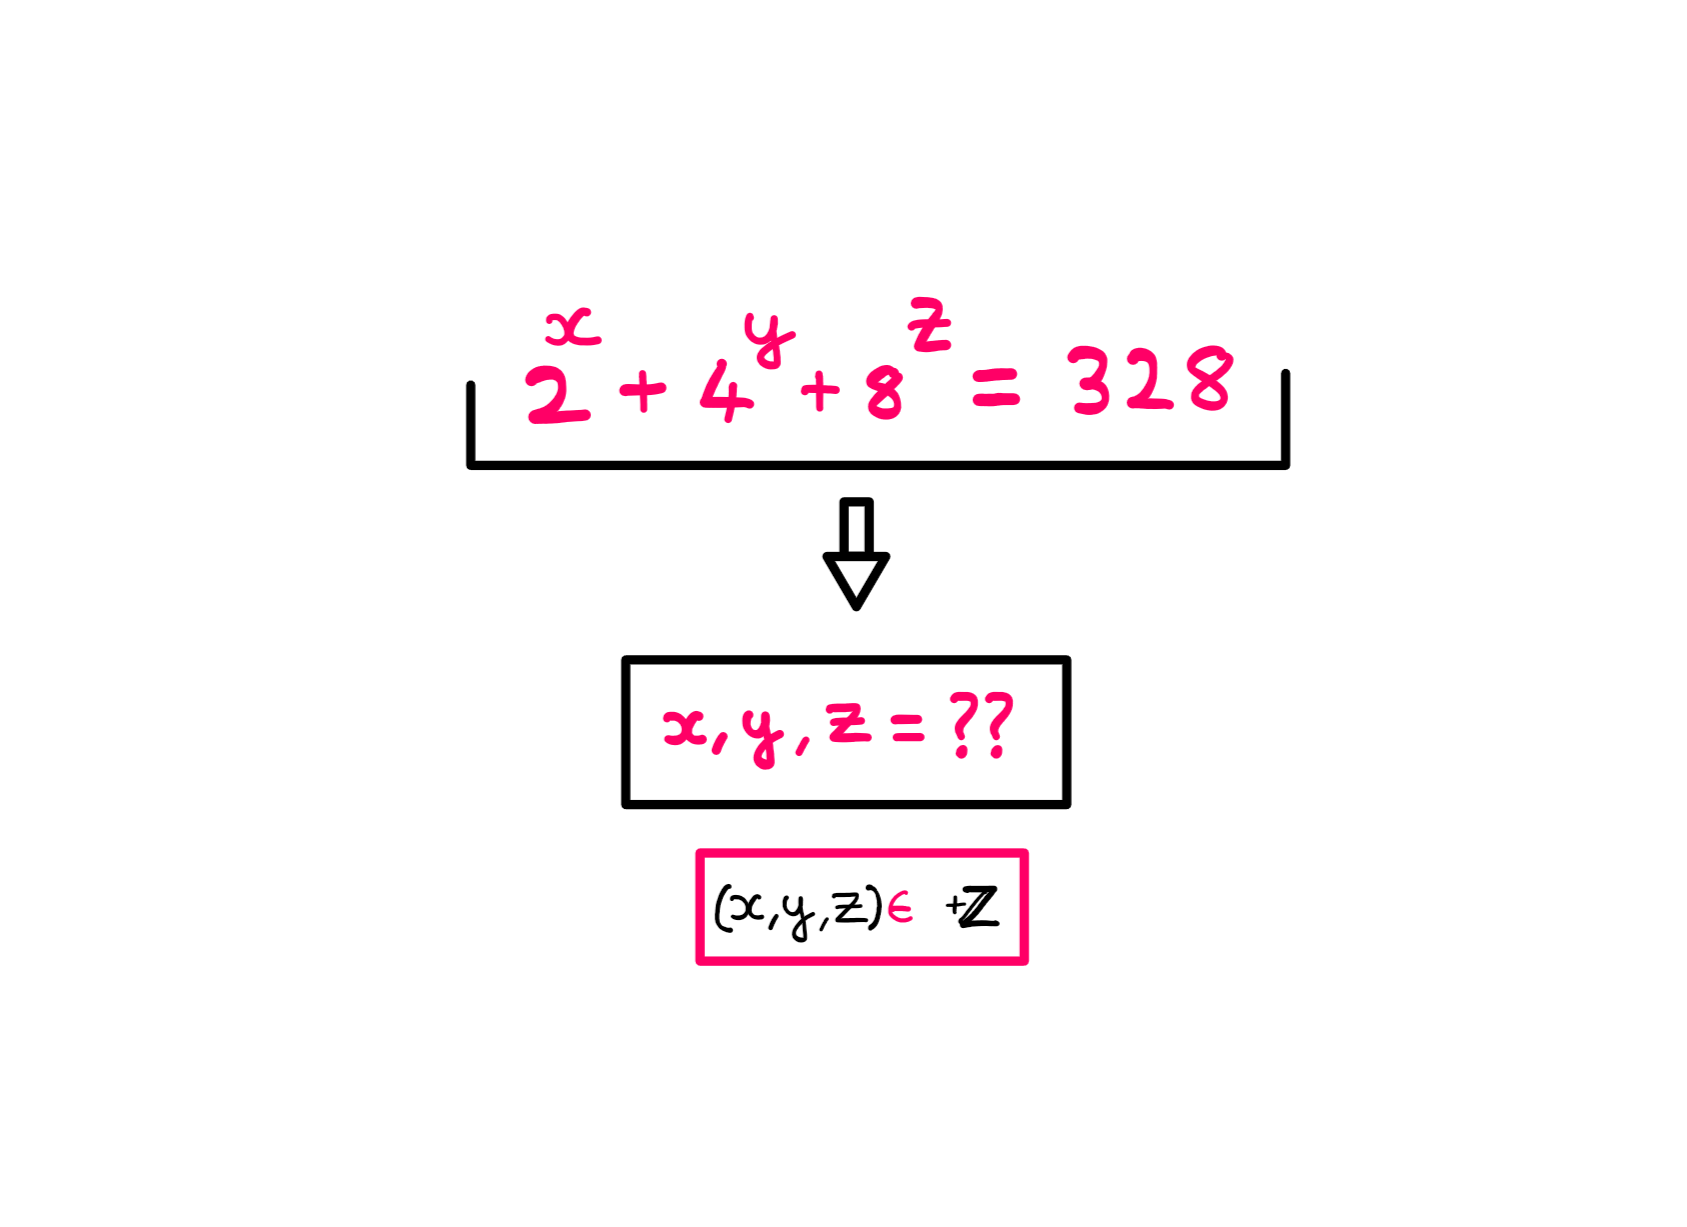 How To Really Solve This Tricky Math Problem? - A whiteboard style illustration showing the following equation: 2^x + 4^y + 8^z = 328; What are 'x', 'y', and 'z' equal to, if 'x', 'y', and 'z' are positive integers.